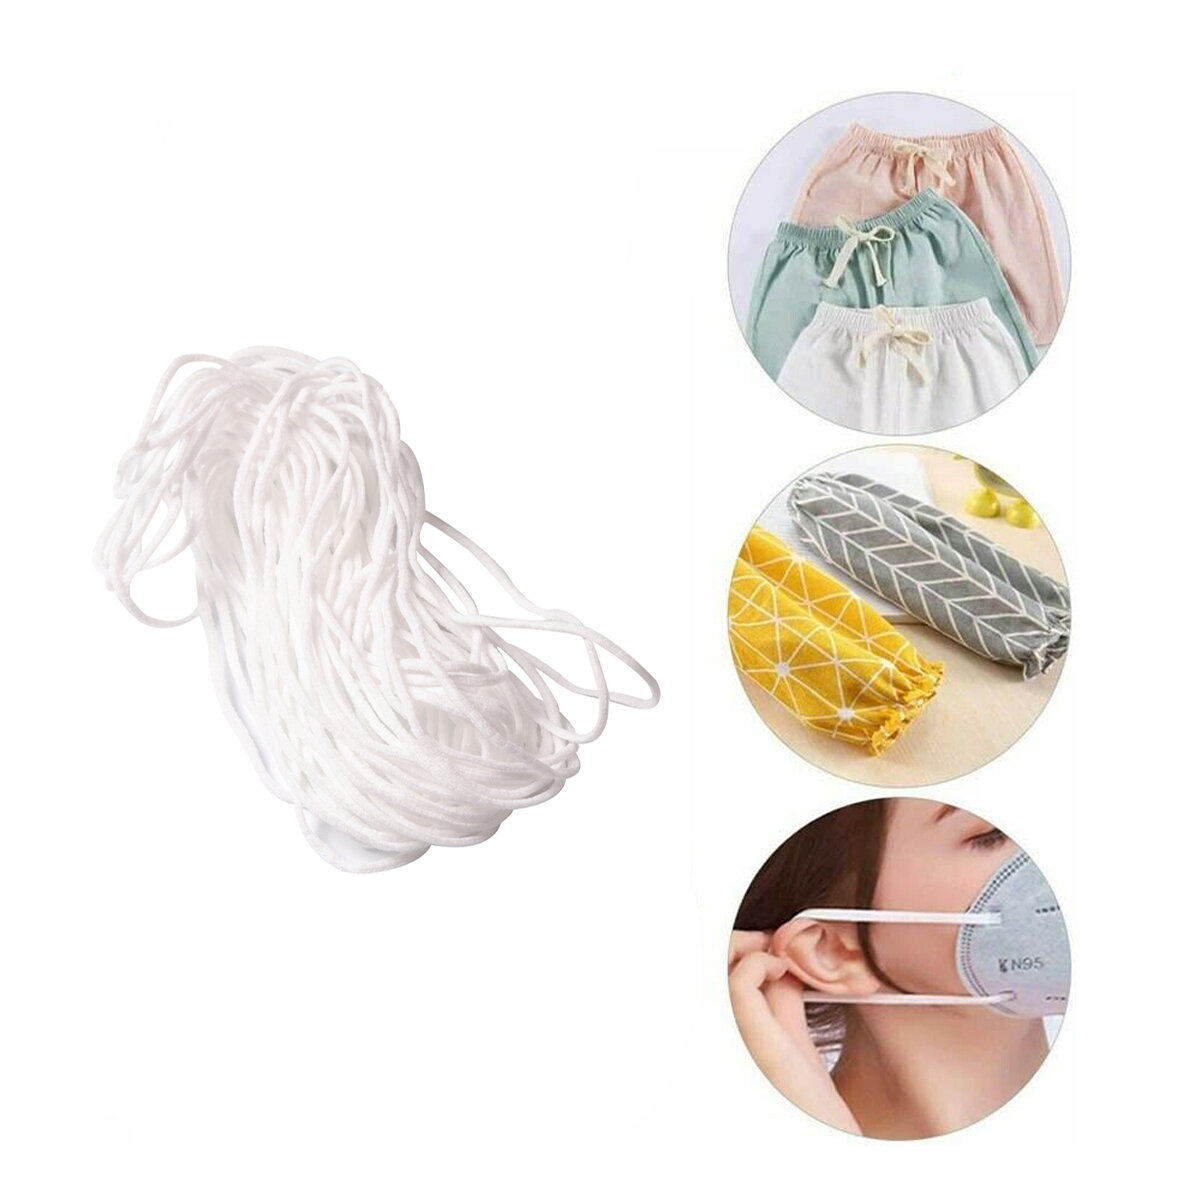 

3mm Round Shape White Mask Ear Strap Elastic Band Cover Rope for Face Decoration